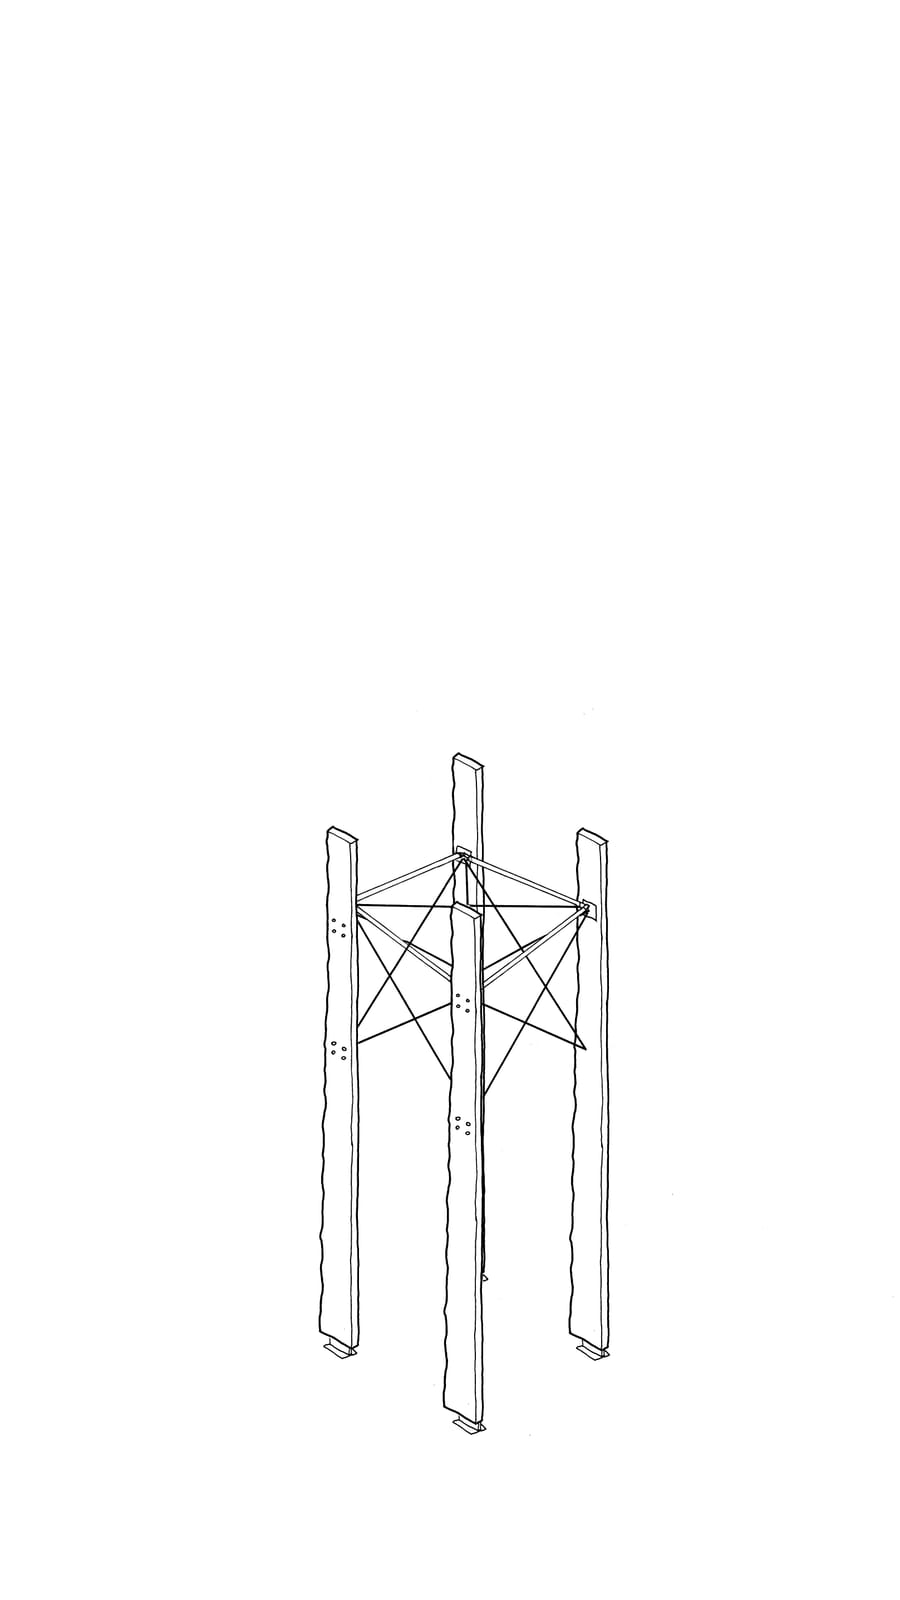 Black line sketch of 4 timber lengths stood in a square with steel rods and cables connecting between them